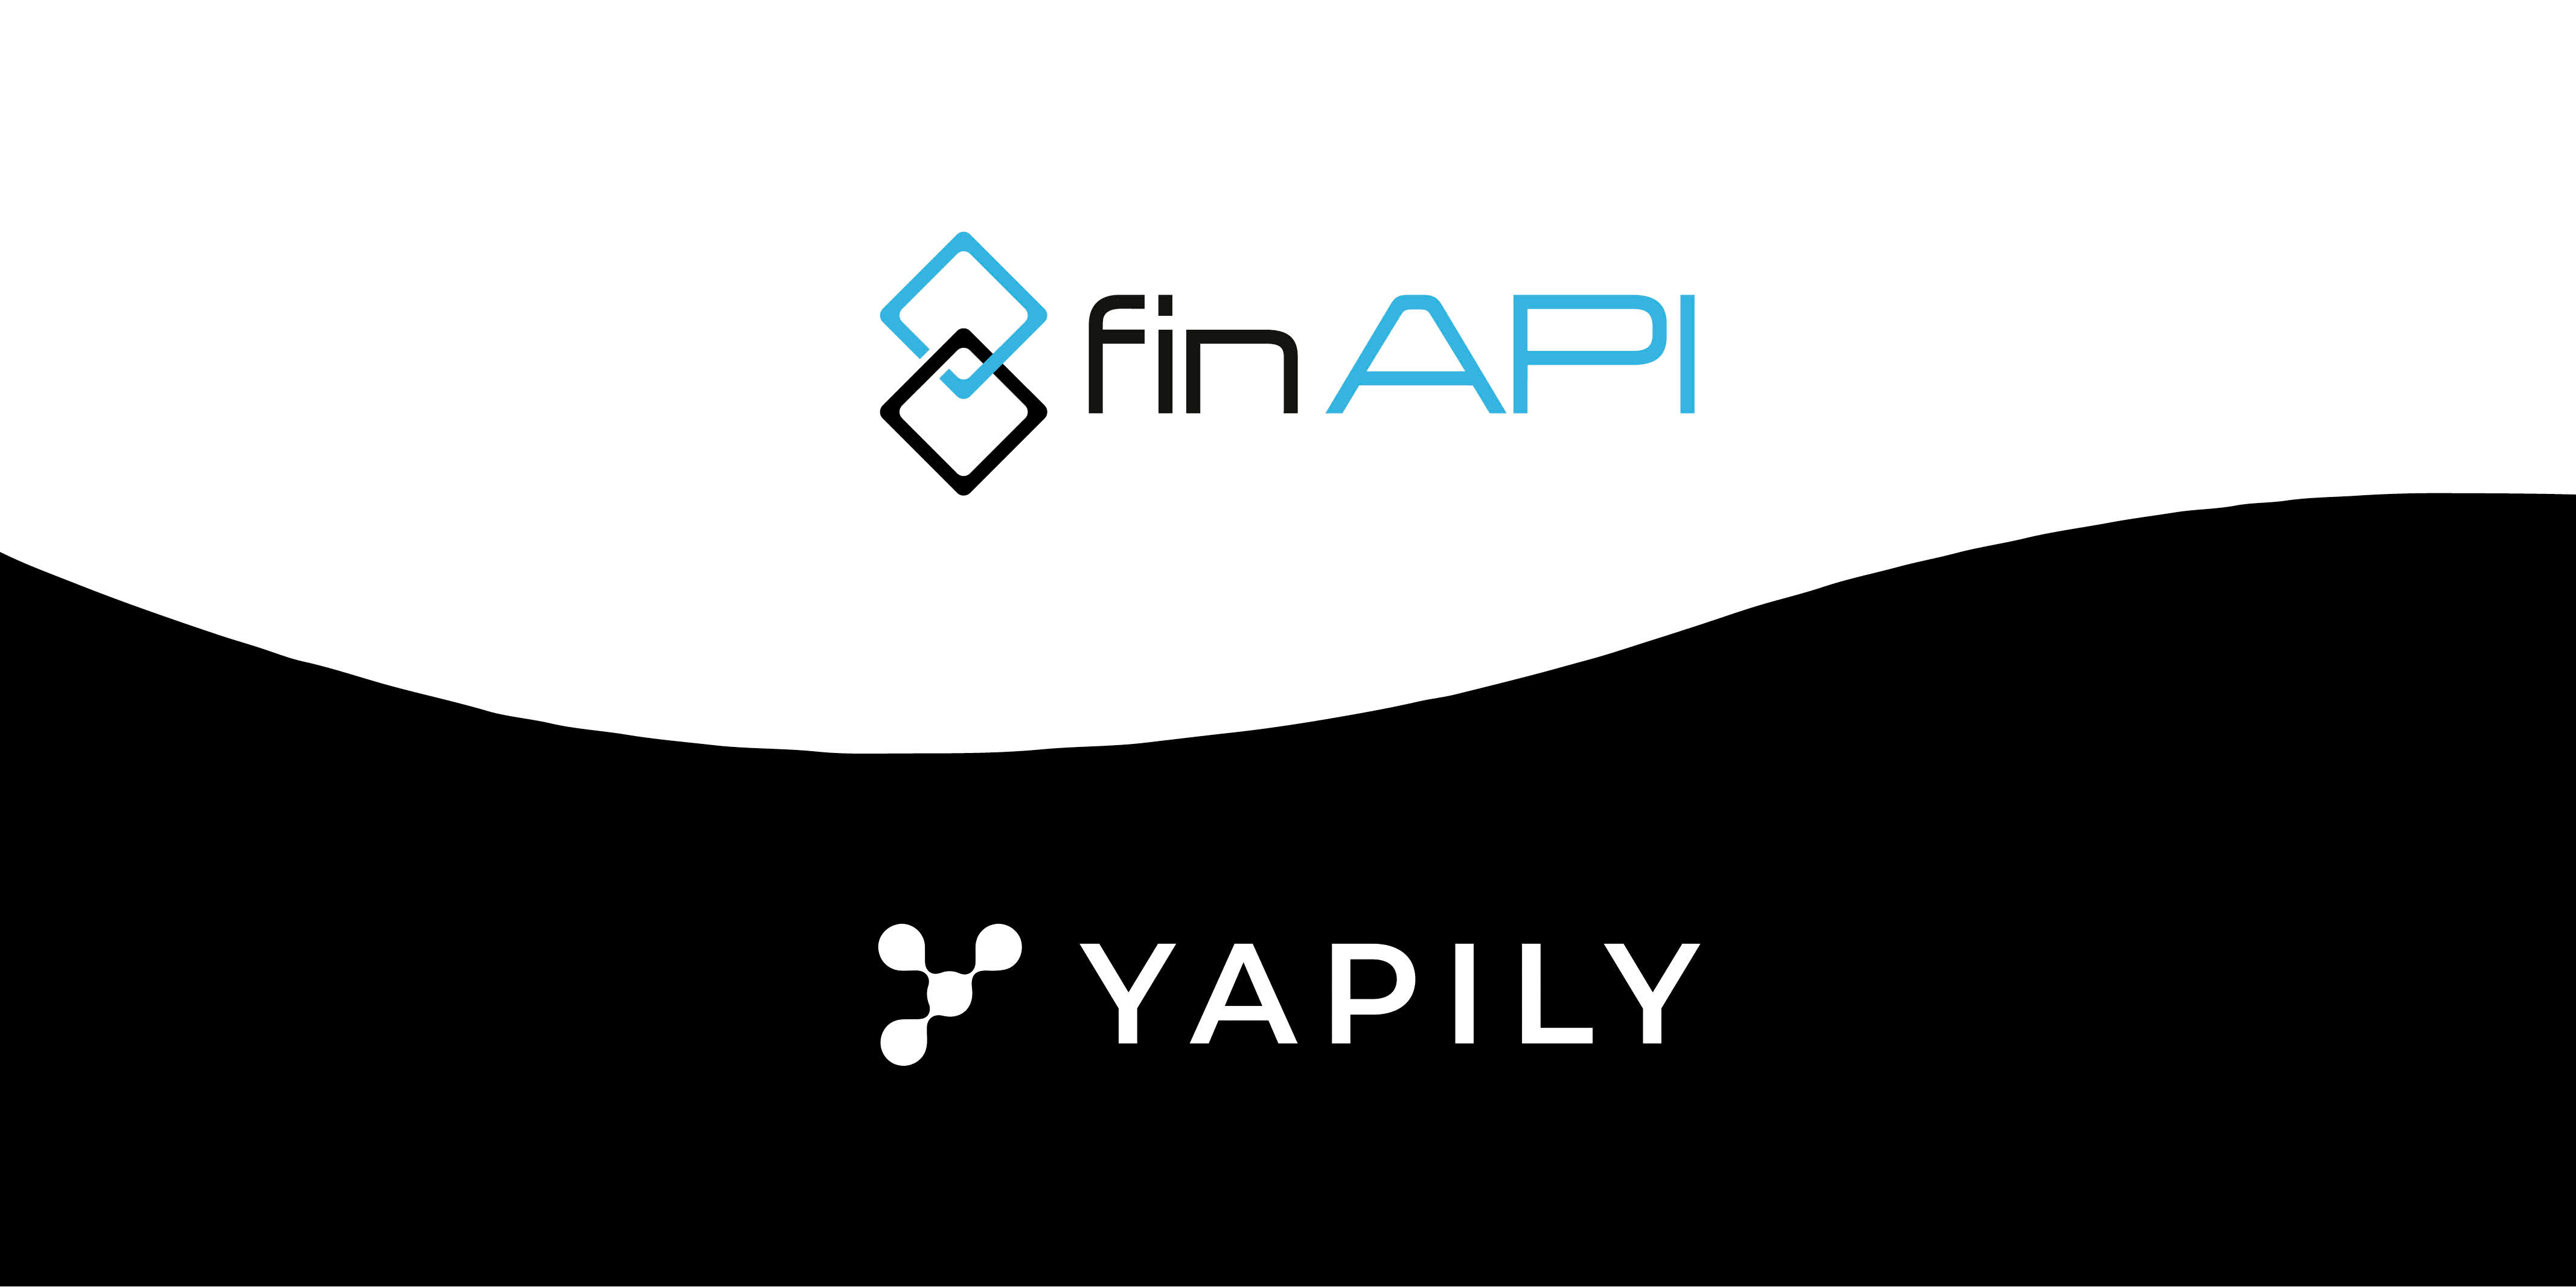 Yapily agrees to acquire finAPI, creating Europe’s leading open banking platform